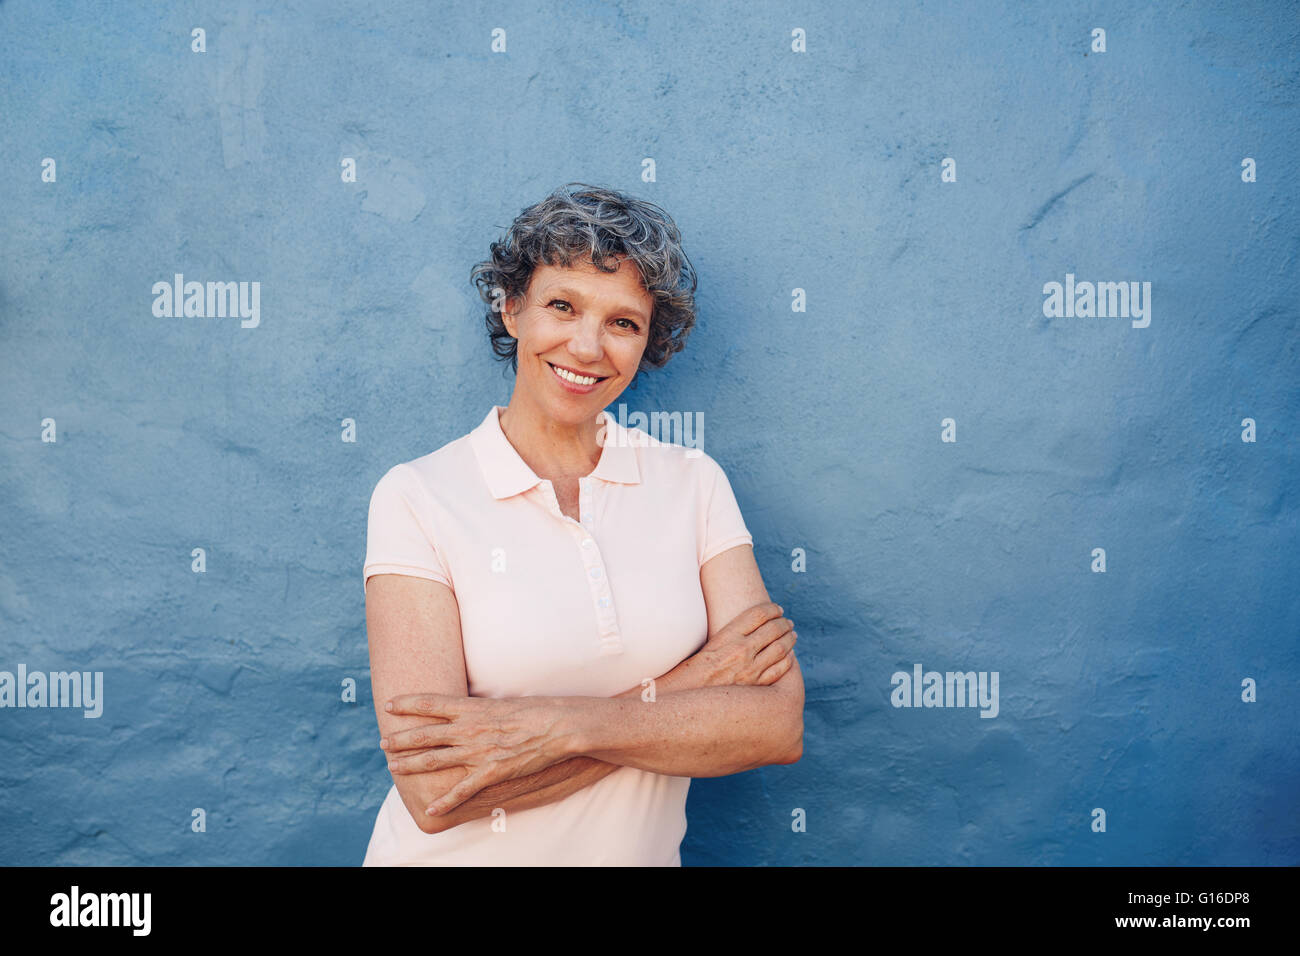 Portrait of attractive mature woman with her arms crossed standing against blue background. She is leaning to a blue wall with c Stock Photo